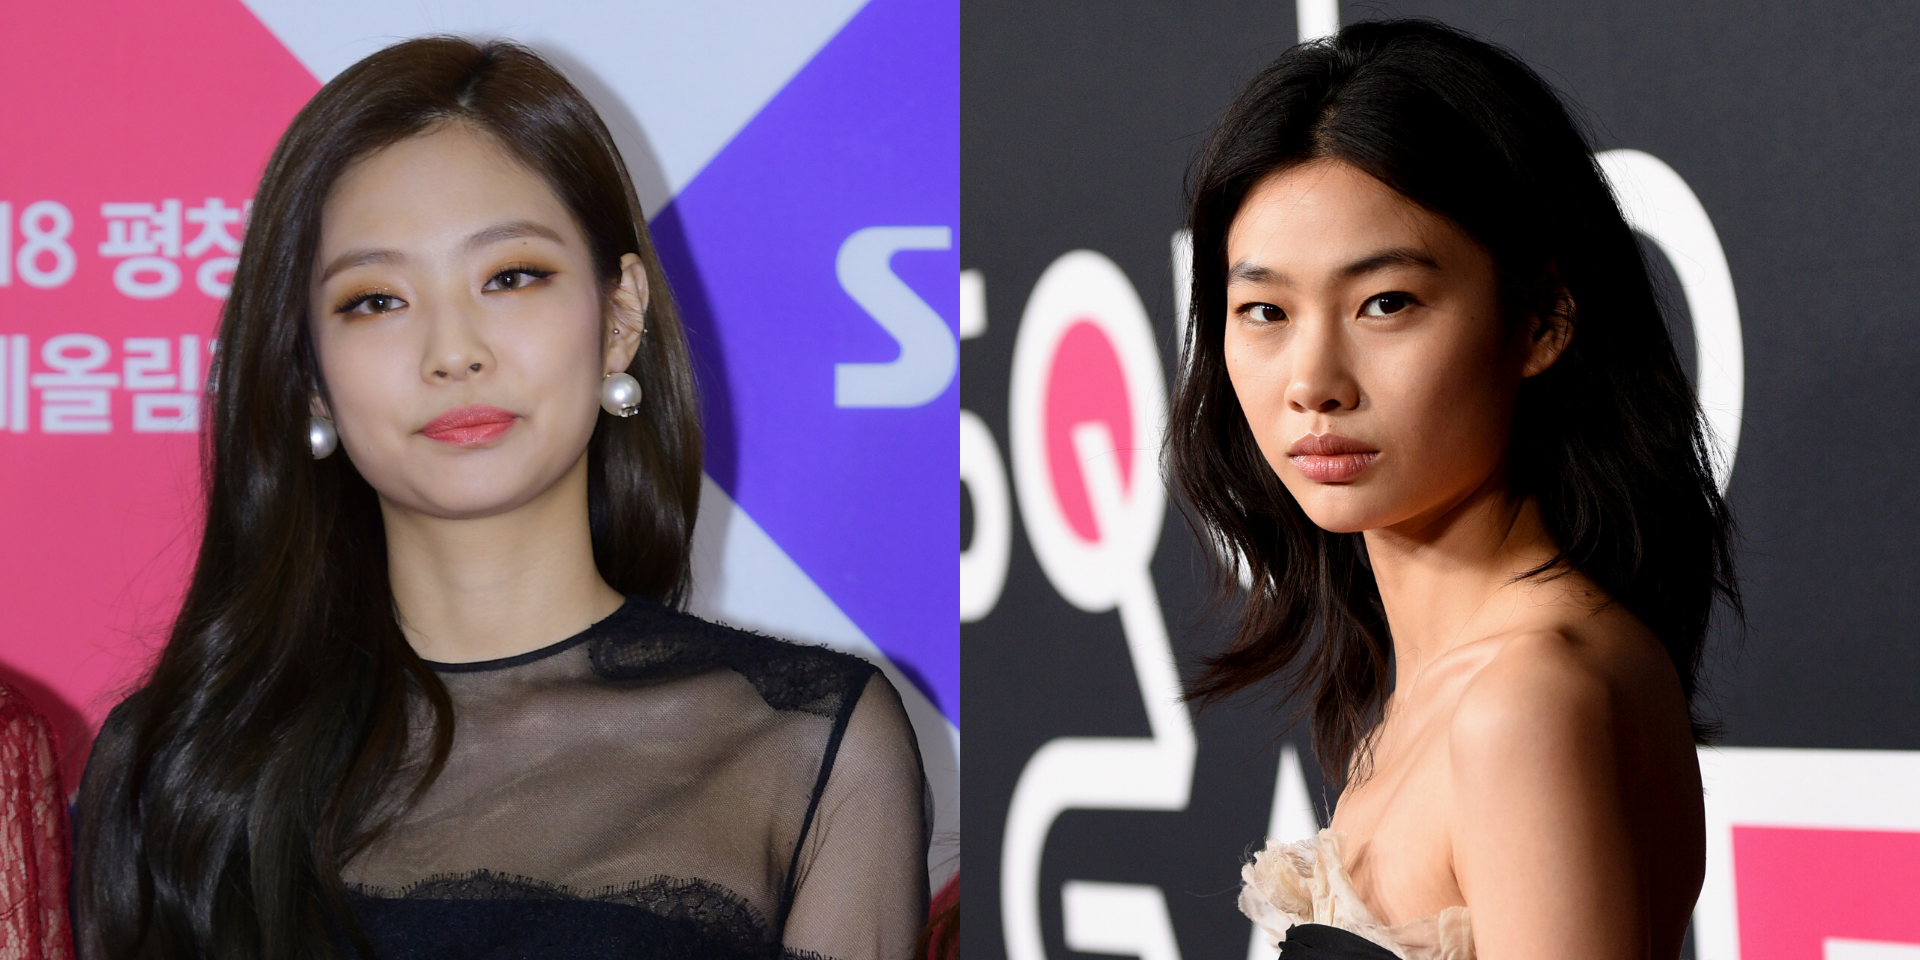 BLACKPINK's Jennie Kim and Hoyeon Jung from Squid Game Reunite